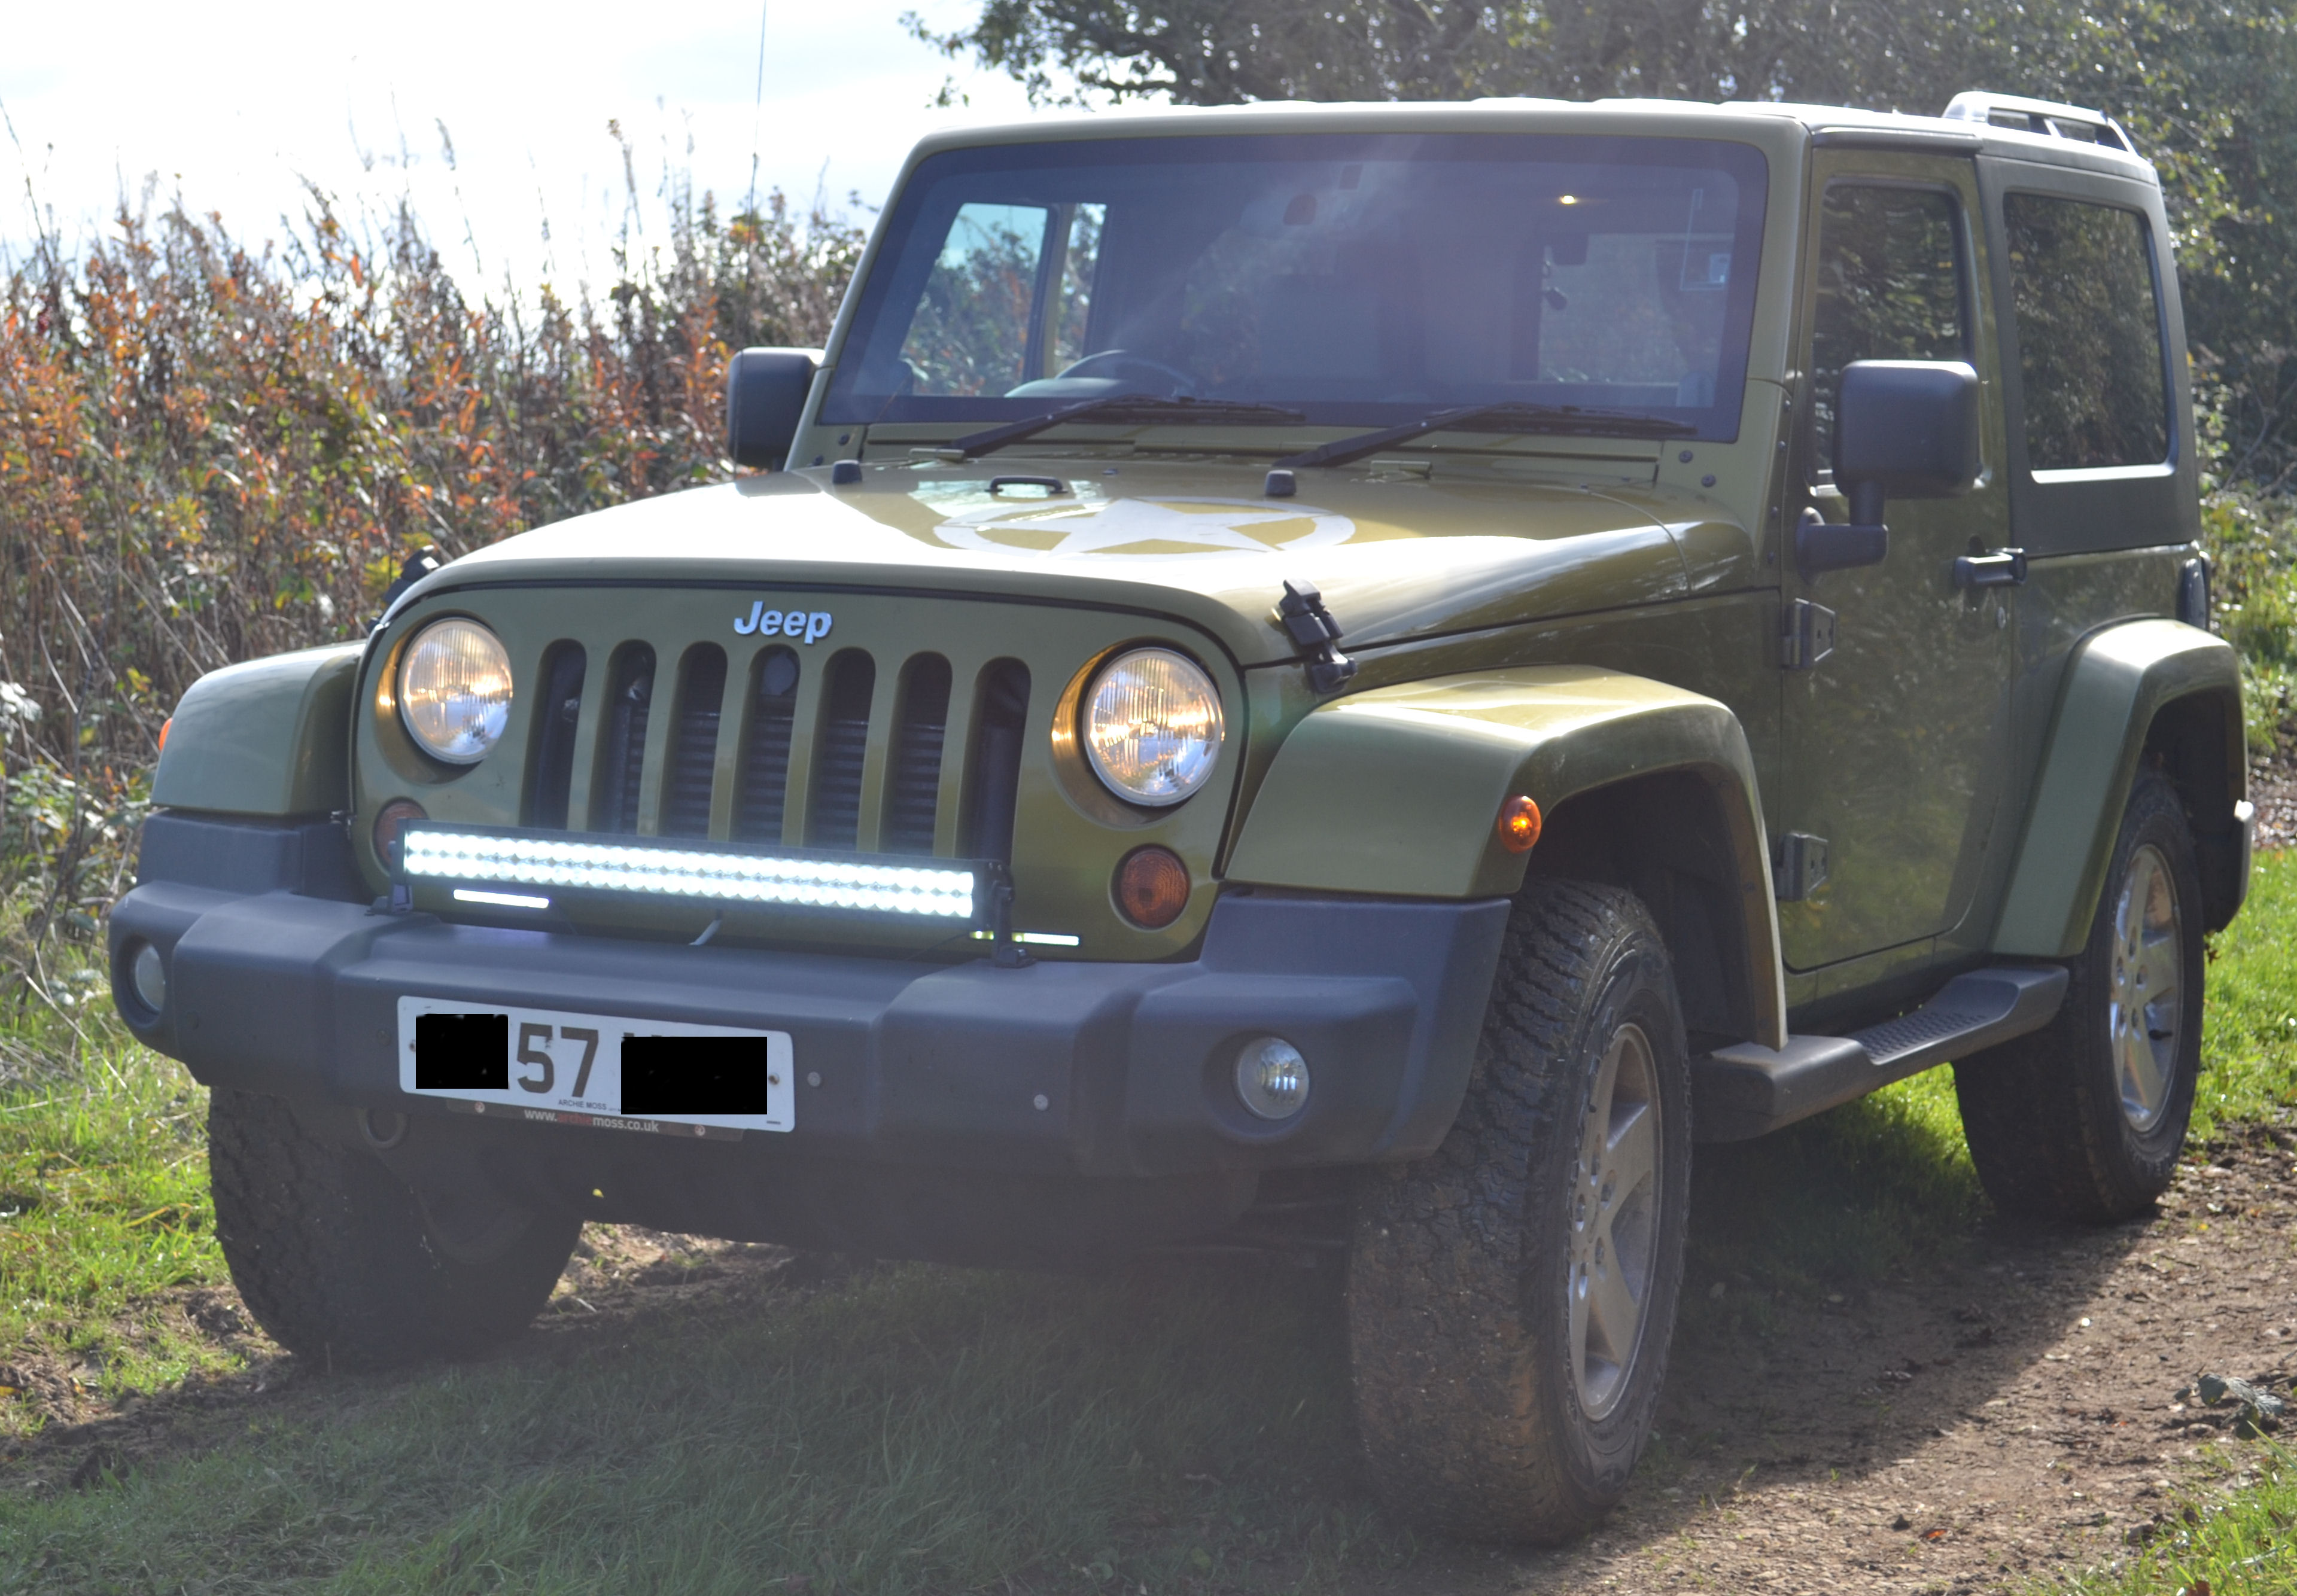 Pics of your offroaders... - Page 49 - Off Road - PistonHeads